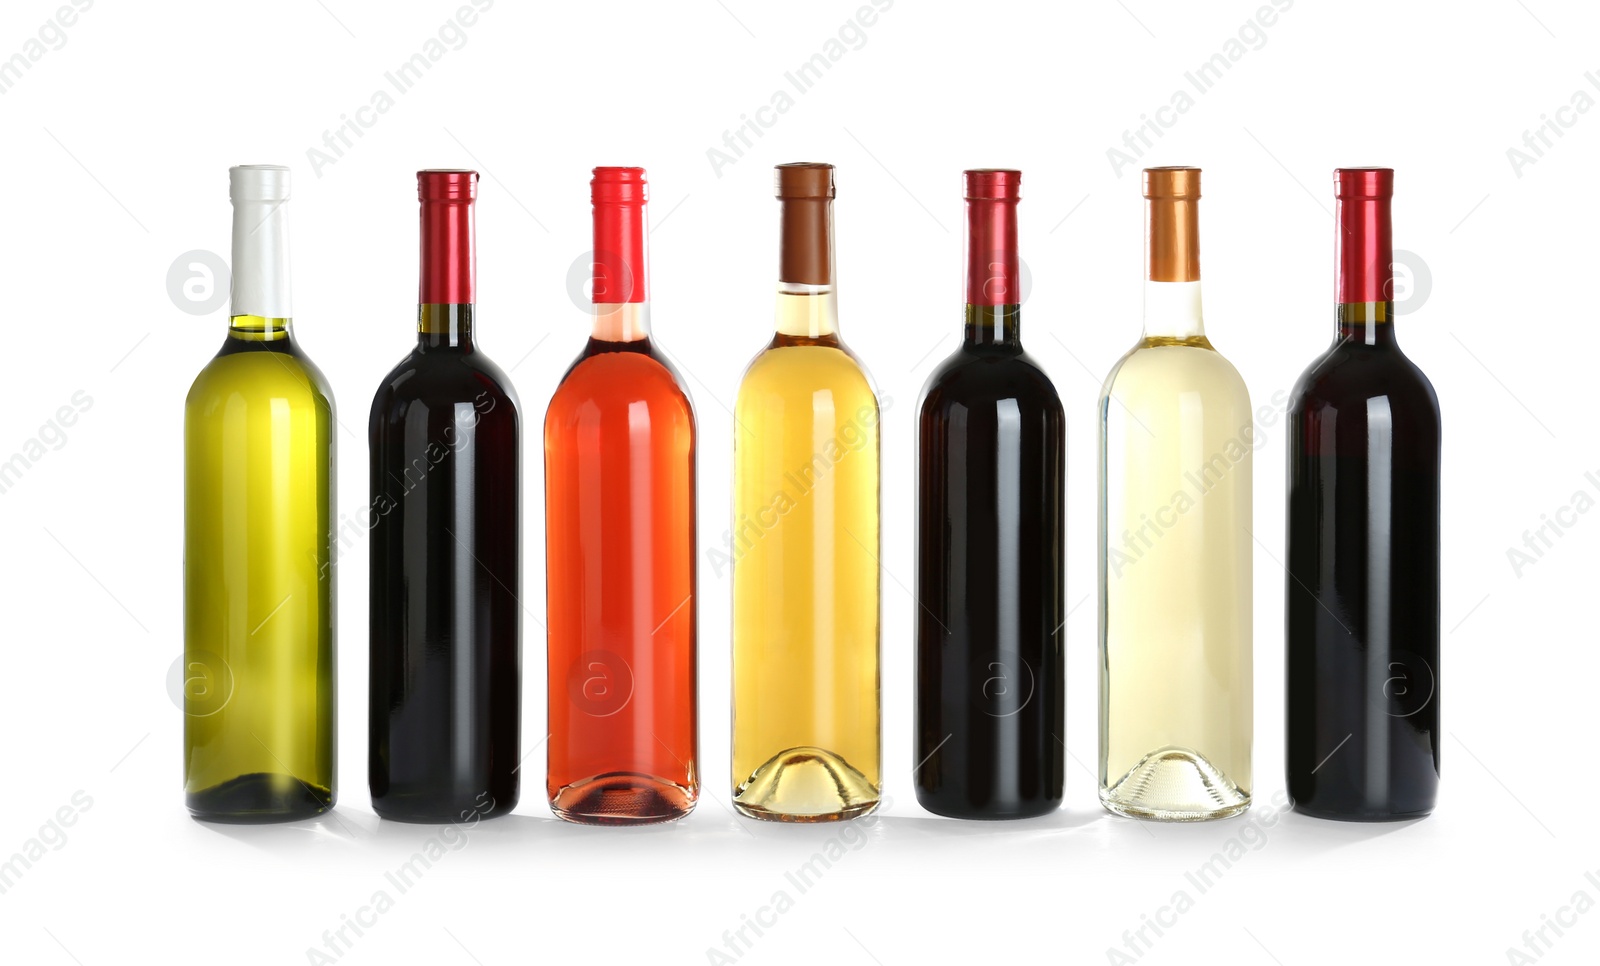 Photo of Bottles with different wine on white background